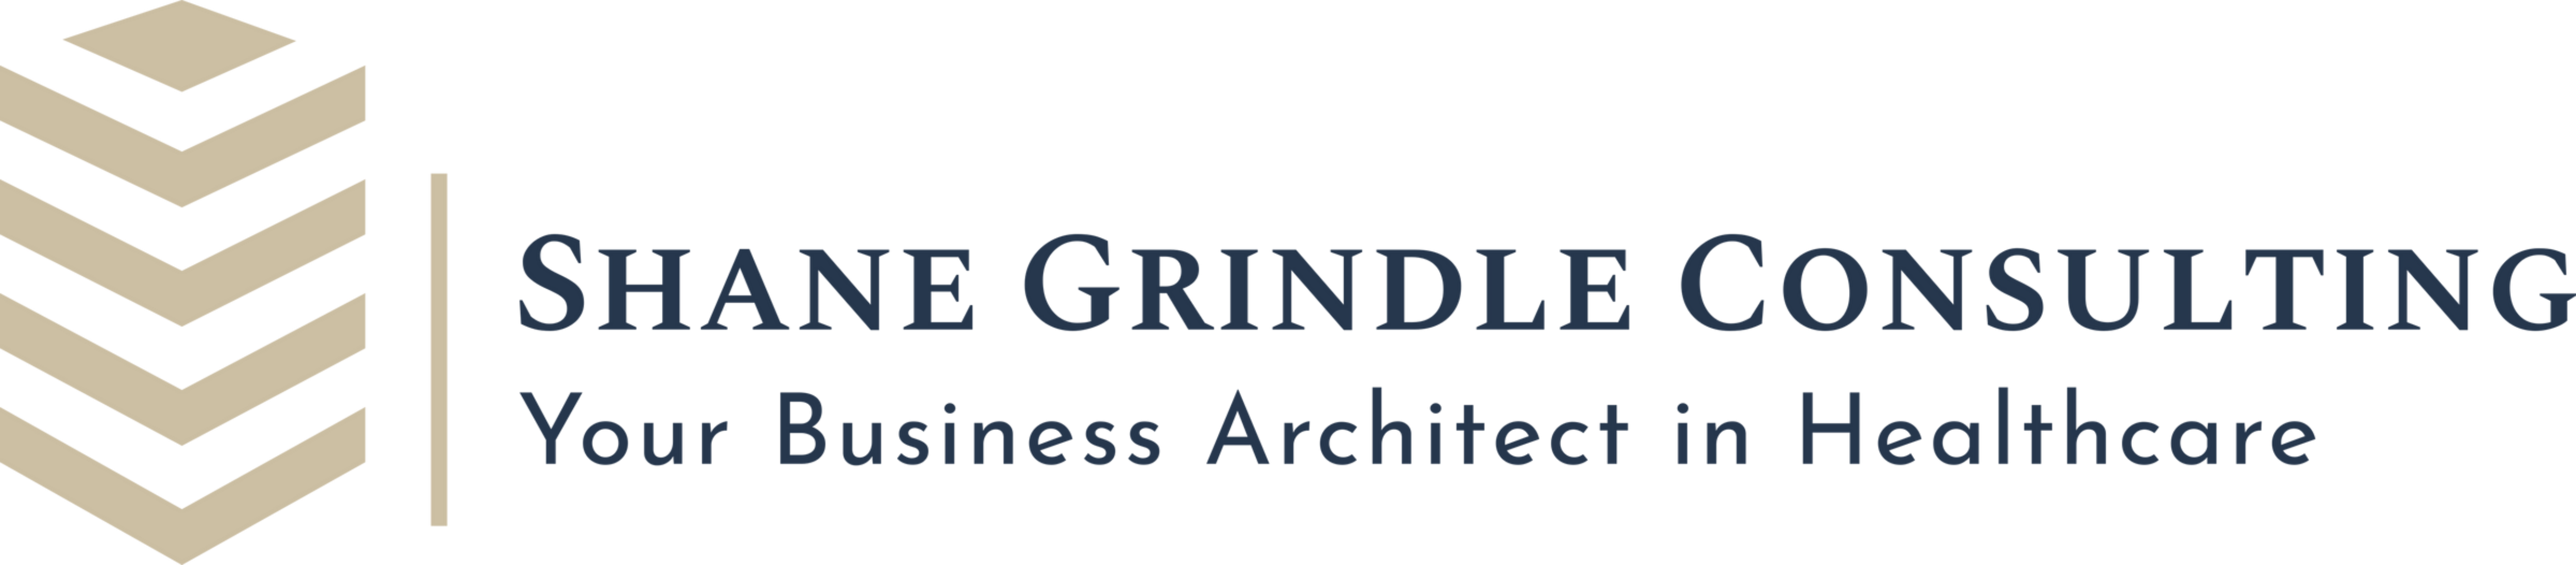 Shane Grindle Consulting